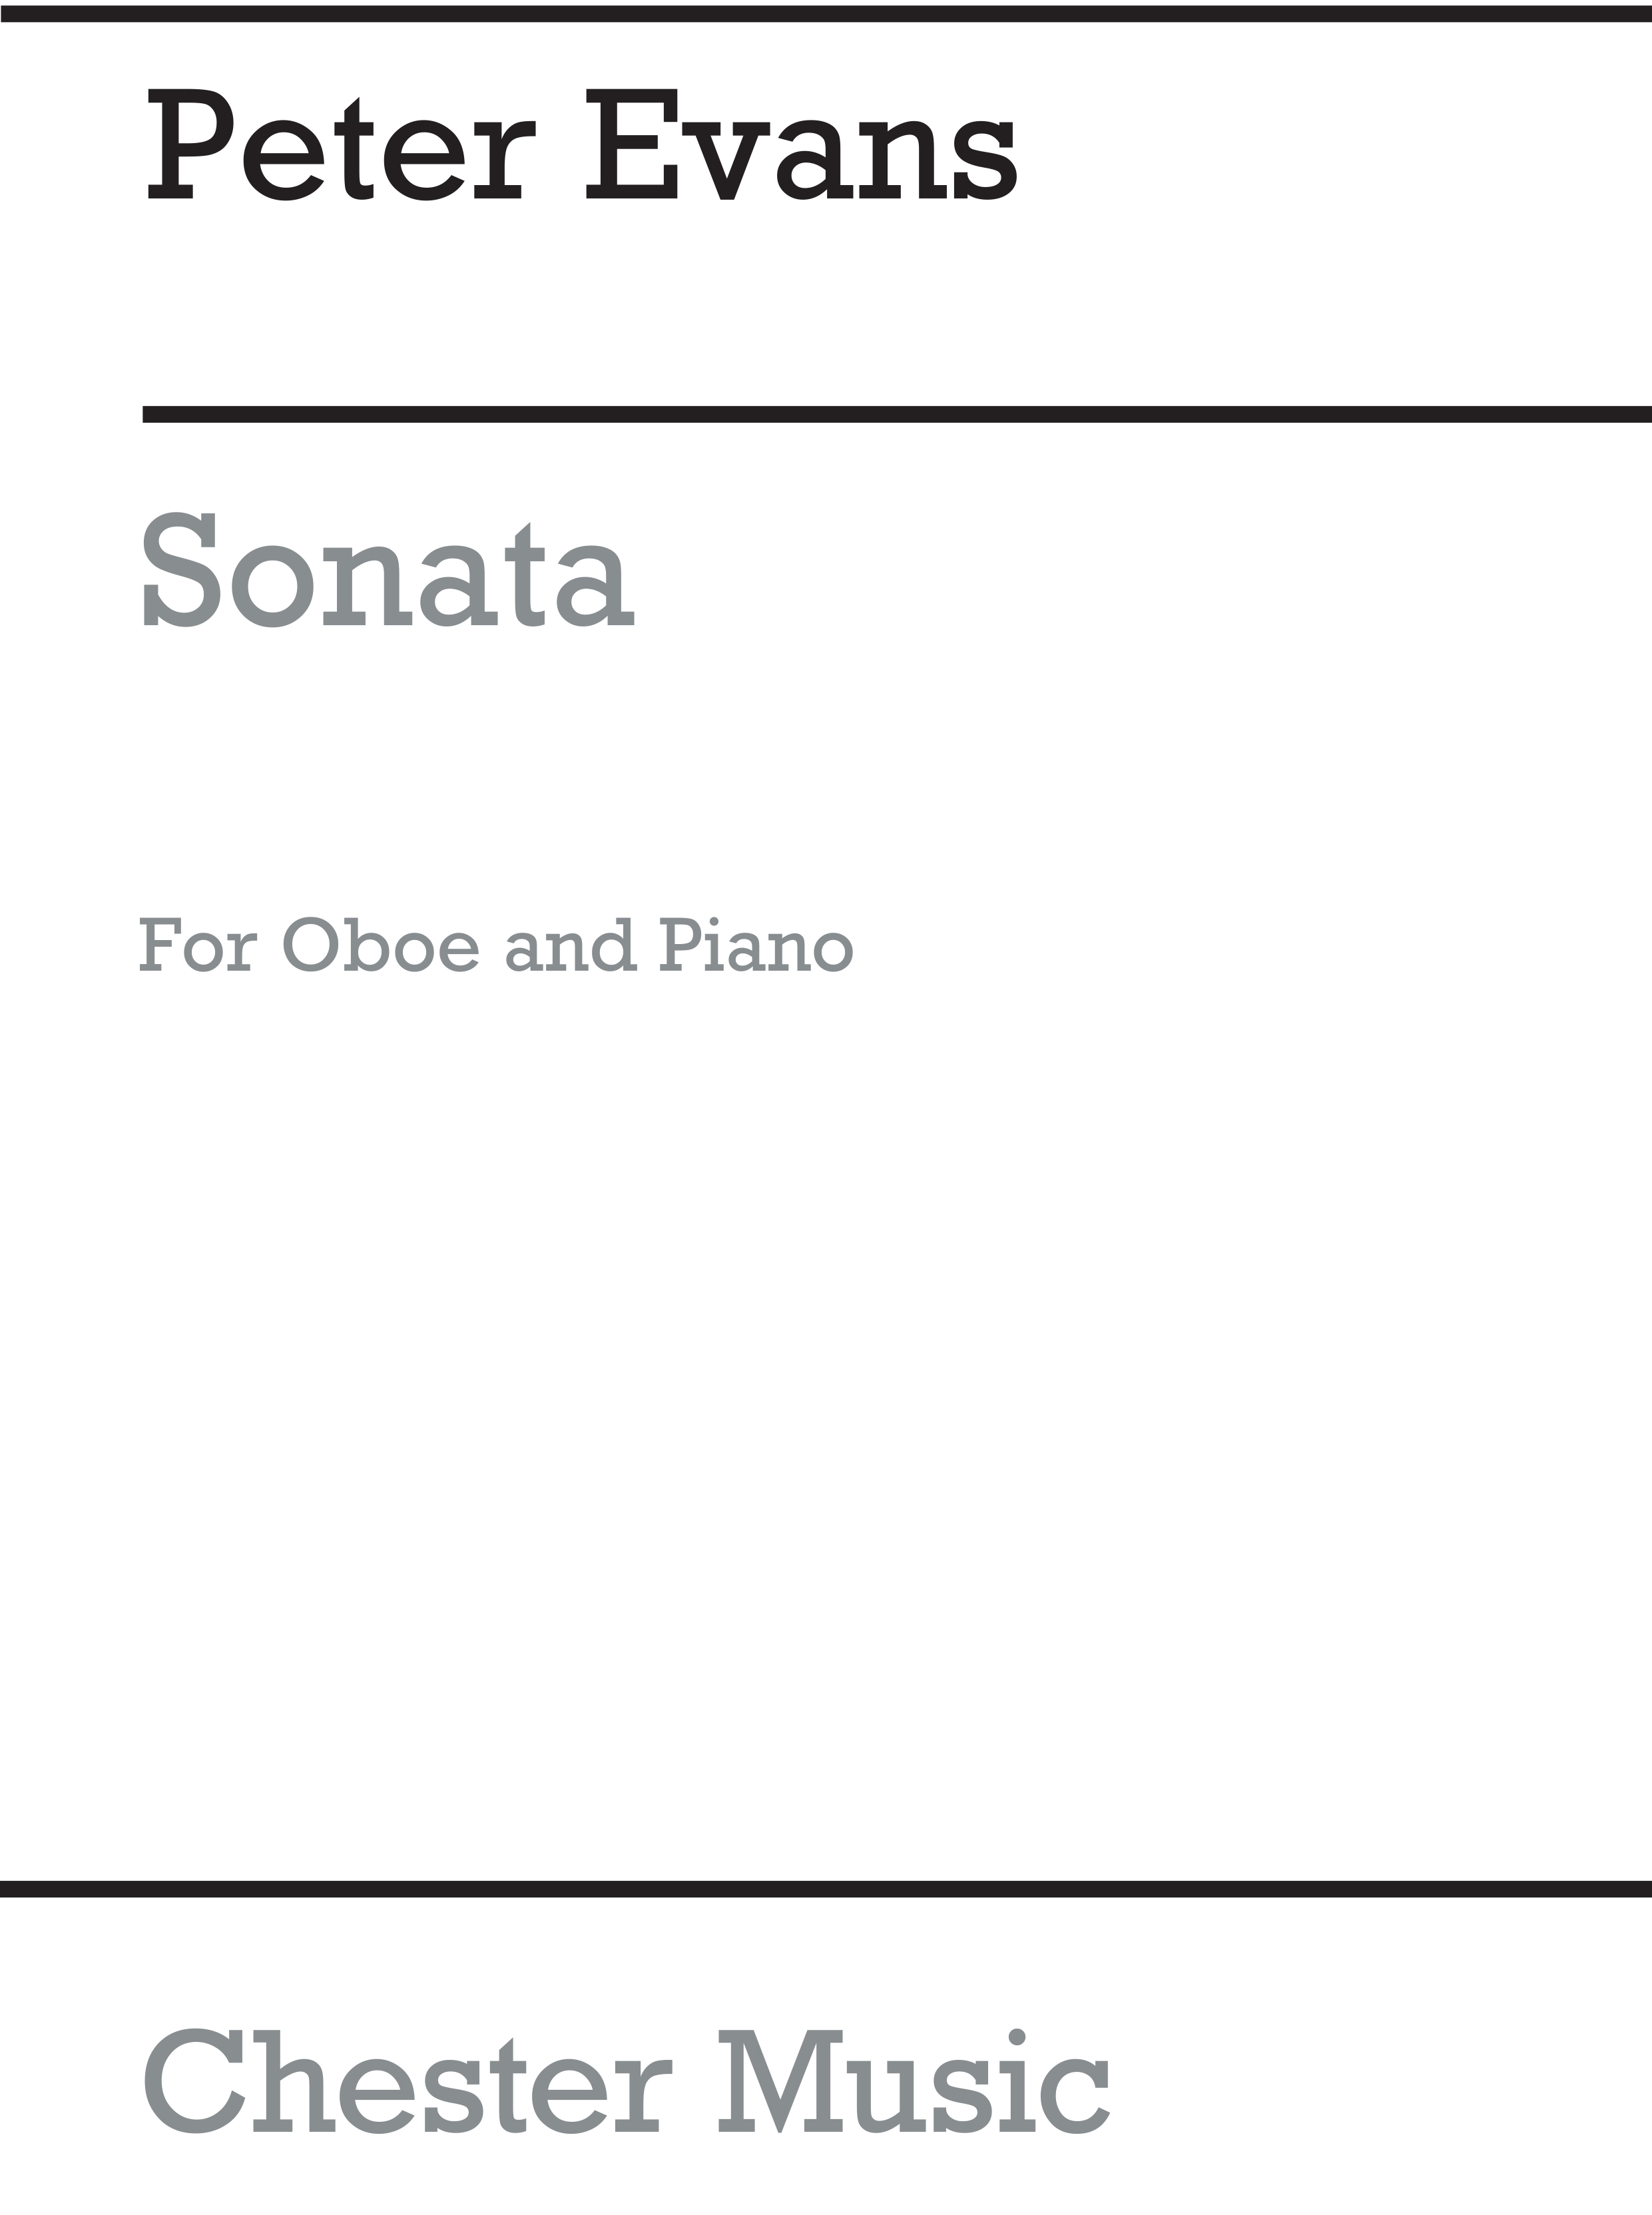 Peter Evans: Sonata For Oboe And Piano